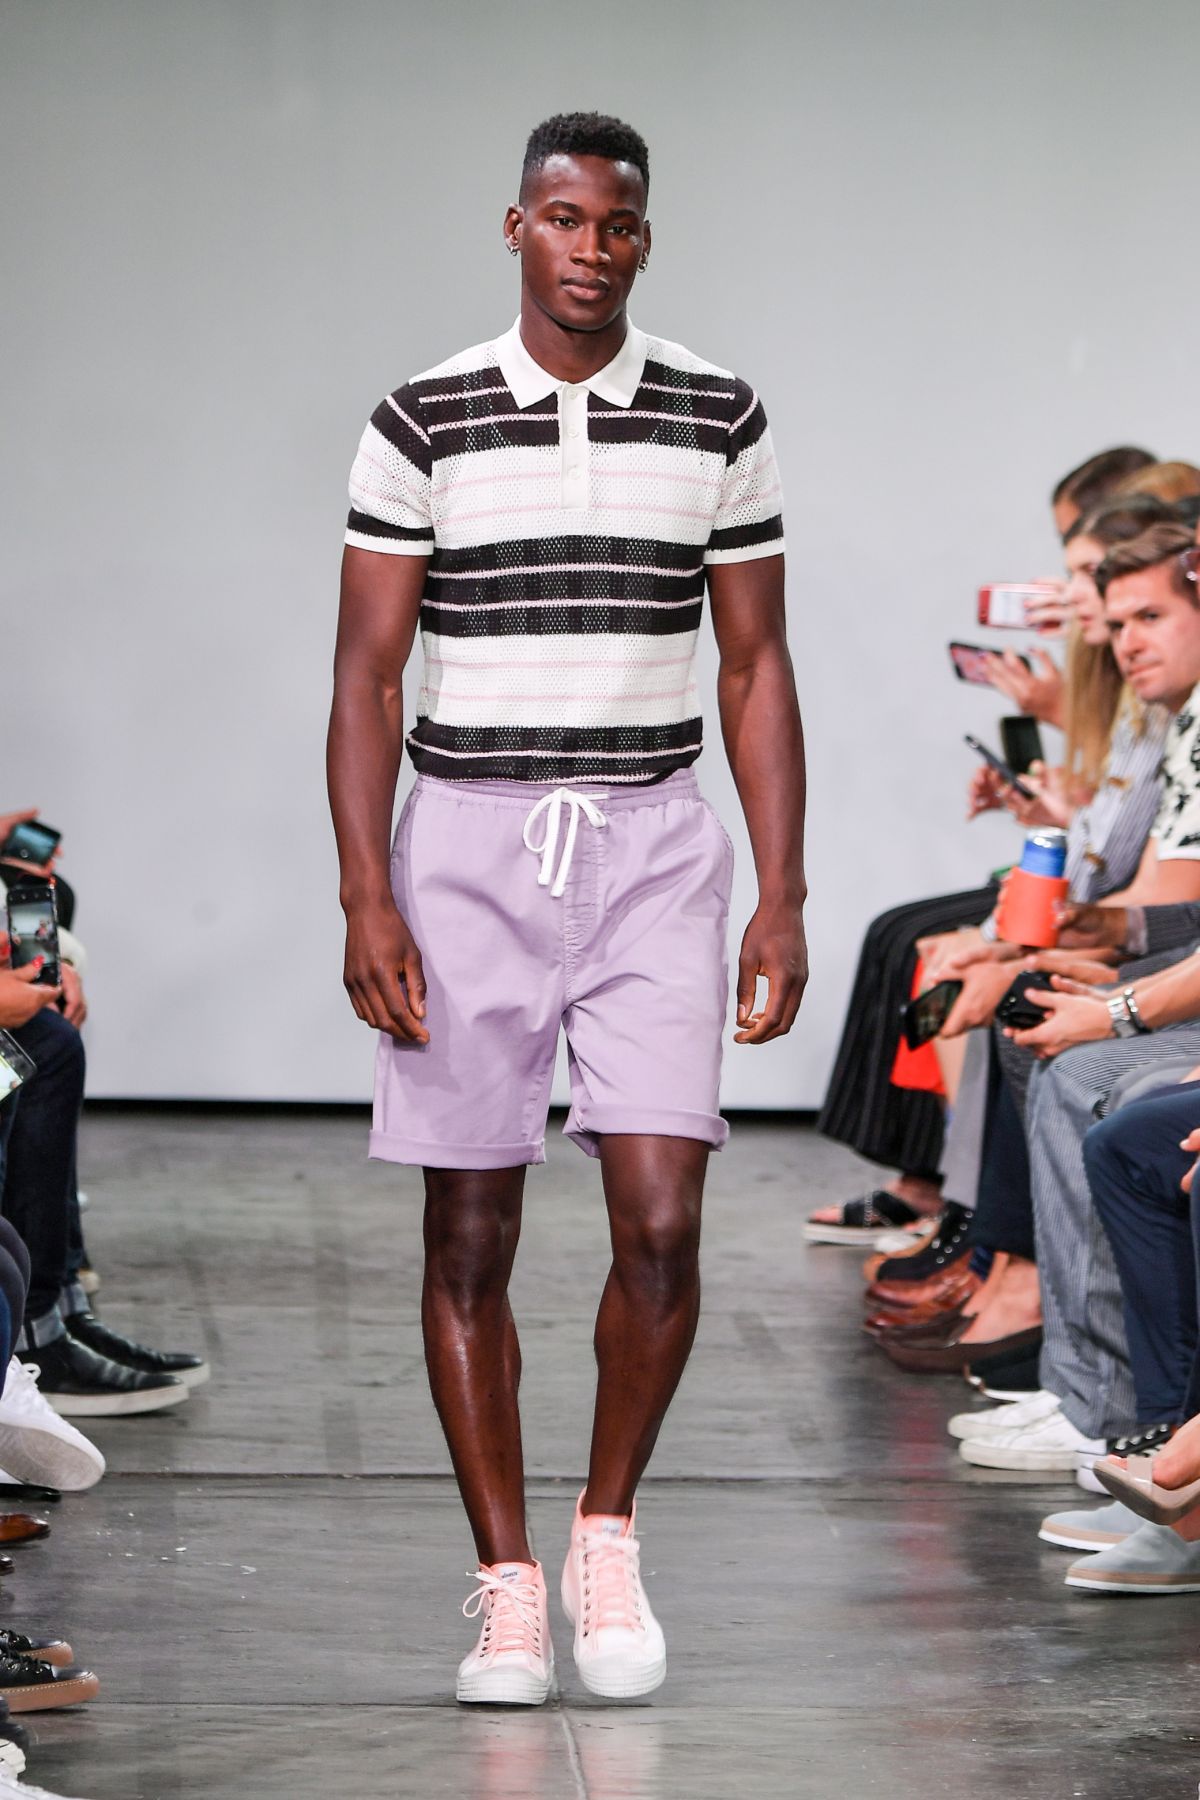 Feast Your Eyes On All Our Fine Black Men On The Runway Of New York ...